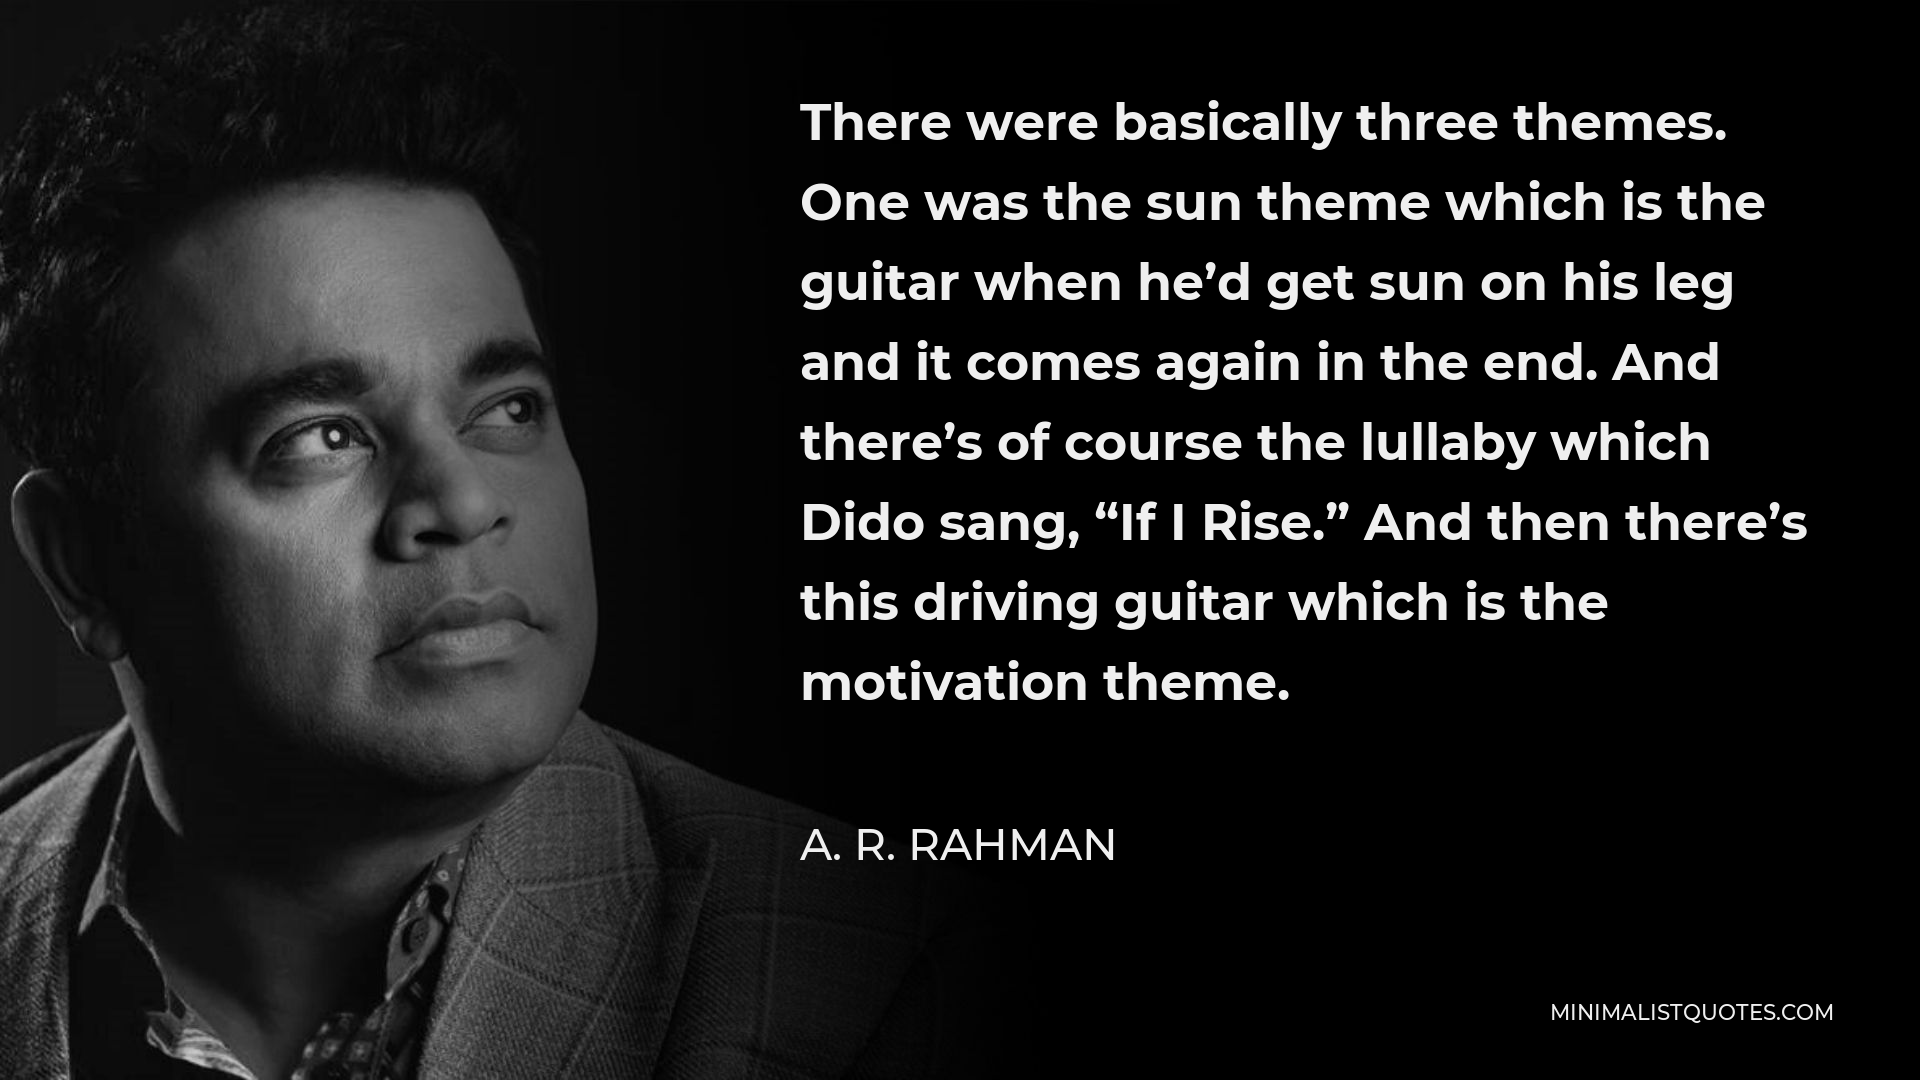 A. R. Rahman Quote - There were basically three themes. One was the sun theme which is the guitar when he’d get sun on his leg and it comes again in the end. And there’s of course the lullaby which Dido sang, “If I Rise.” And then there’s this driving guitar which is the motivation theme.